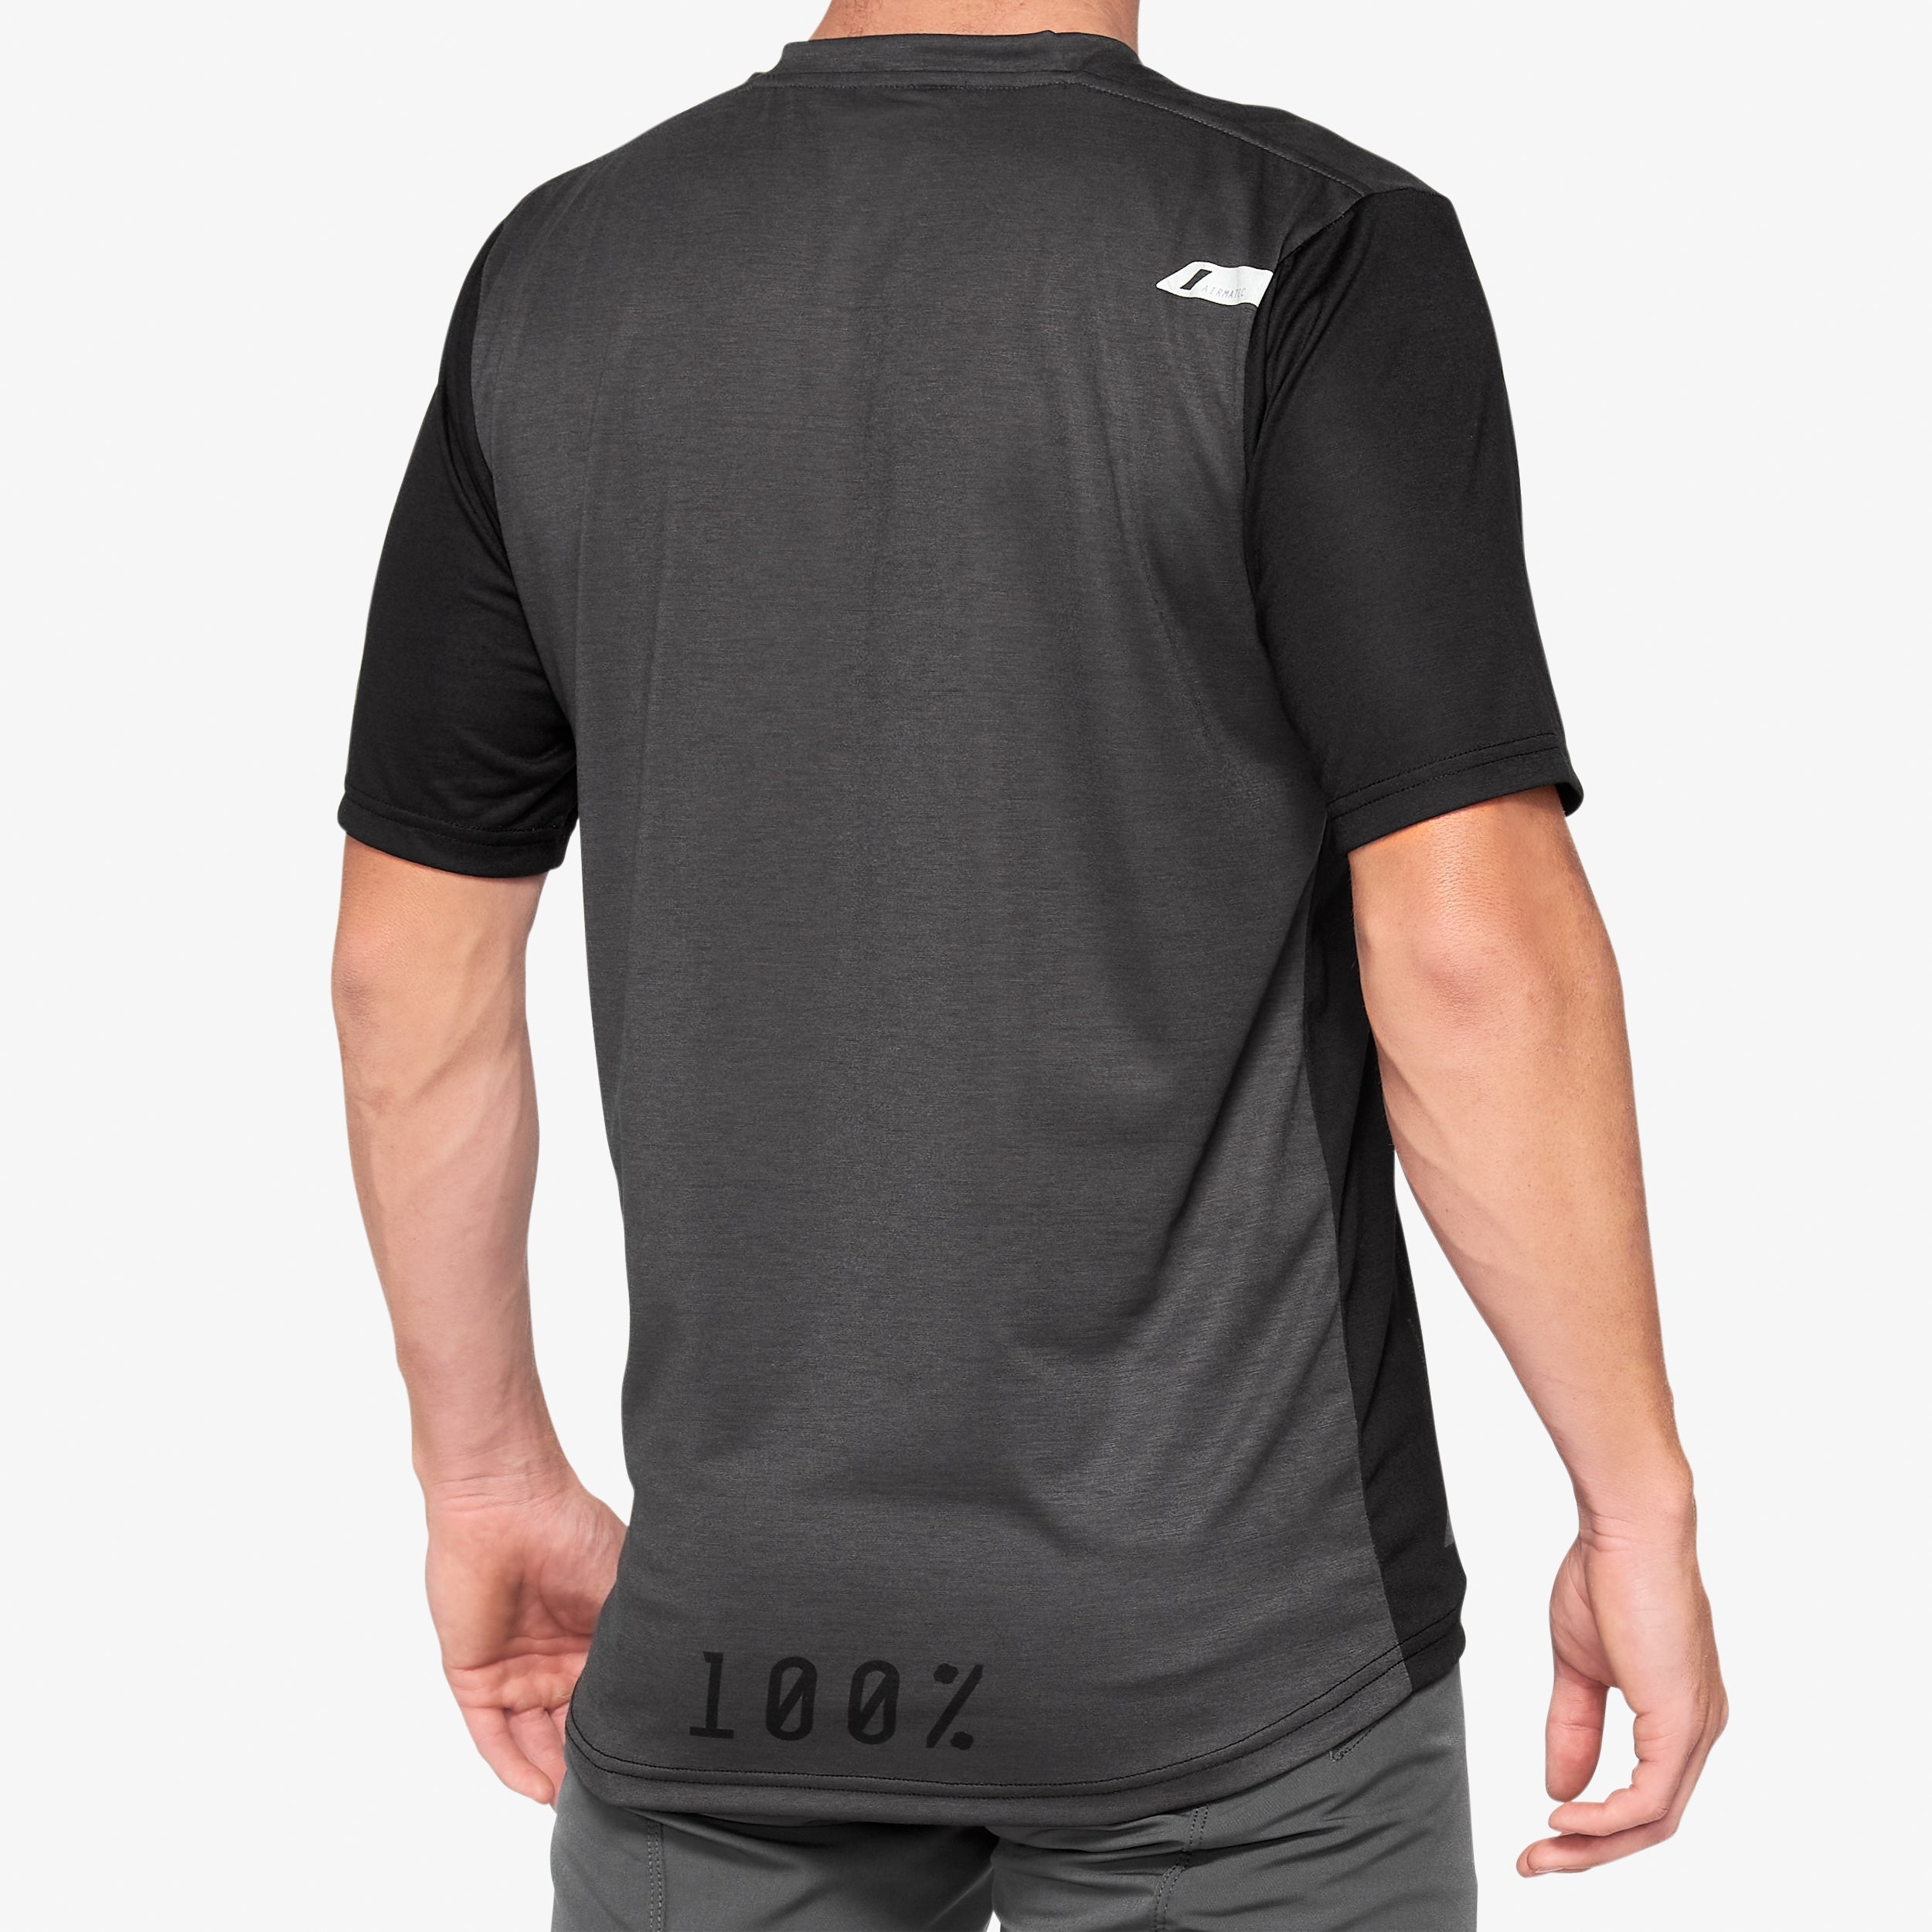 AIRMATIC Jersey Black/Charcoal - Secondary